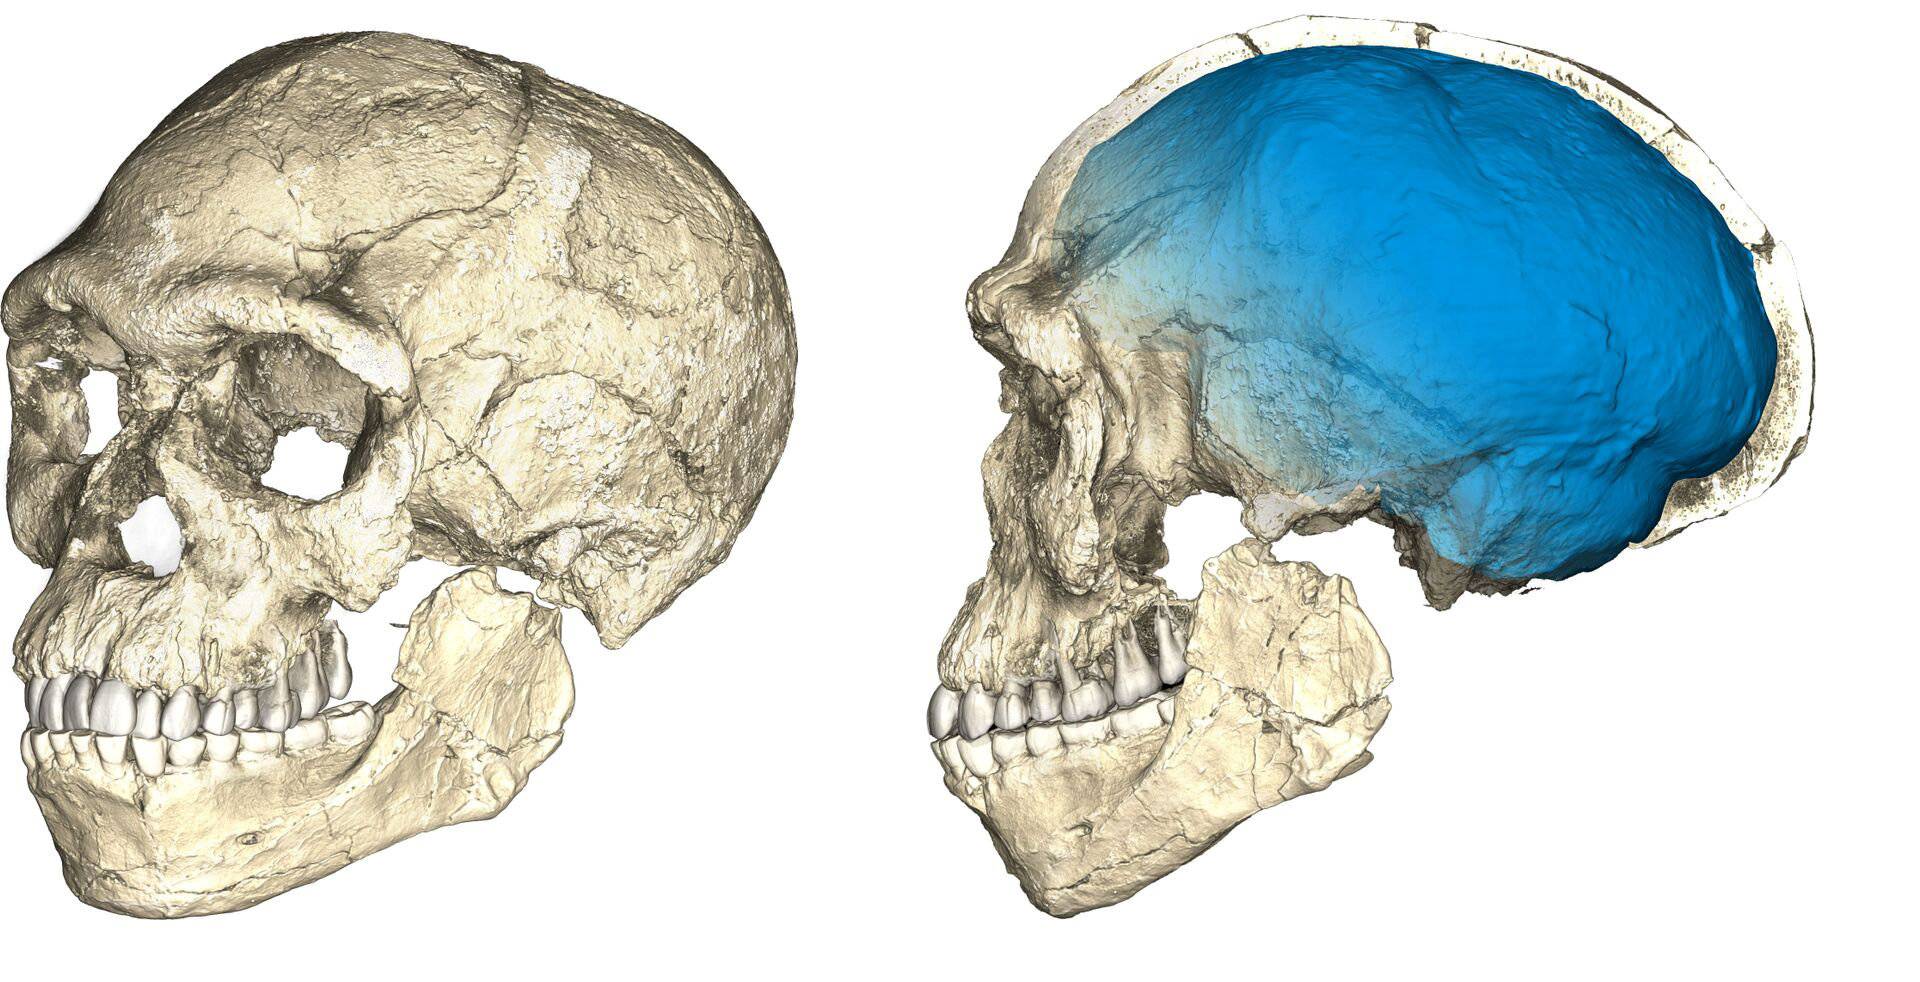 Two views of a composite reconstruction of the earliest known Homo sapiens fossils from Jebel Irhoud in Morocco are shown in this handout photo